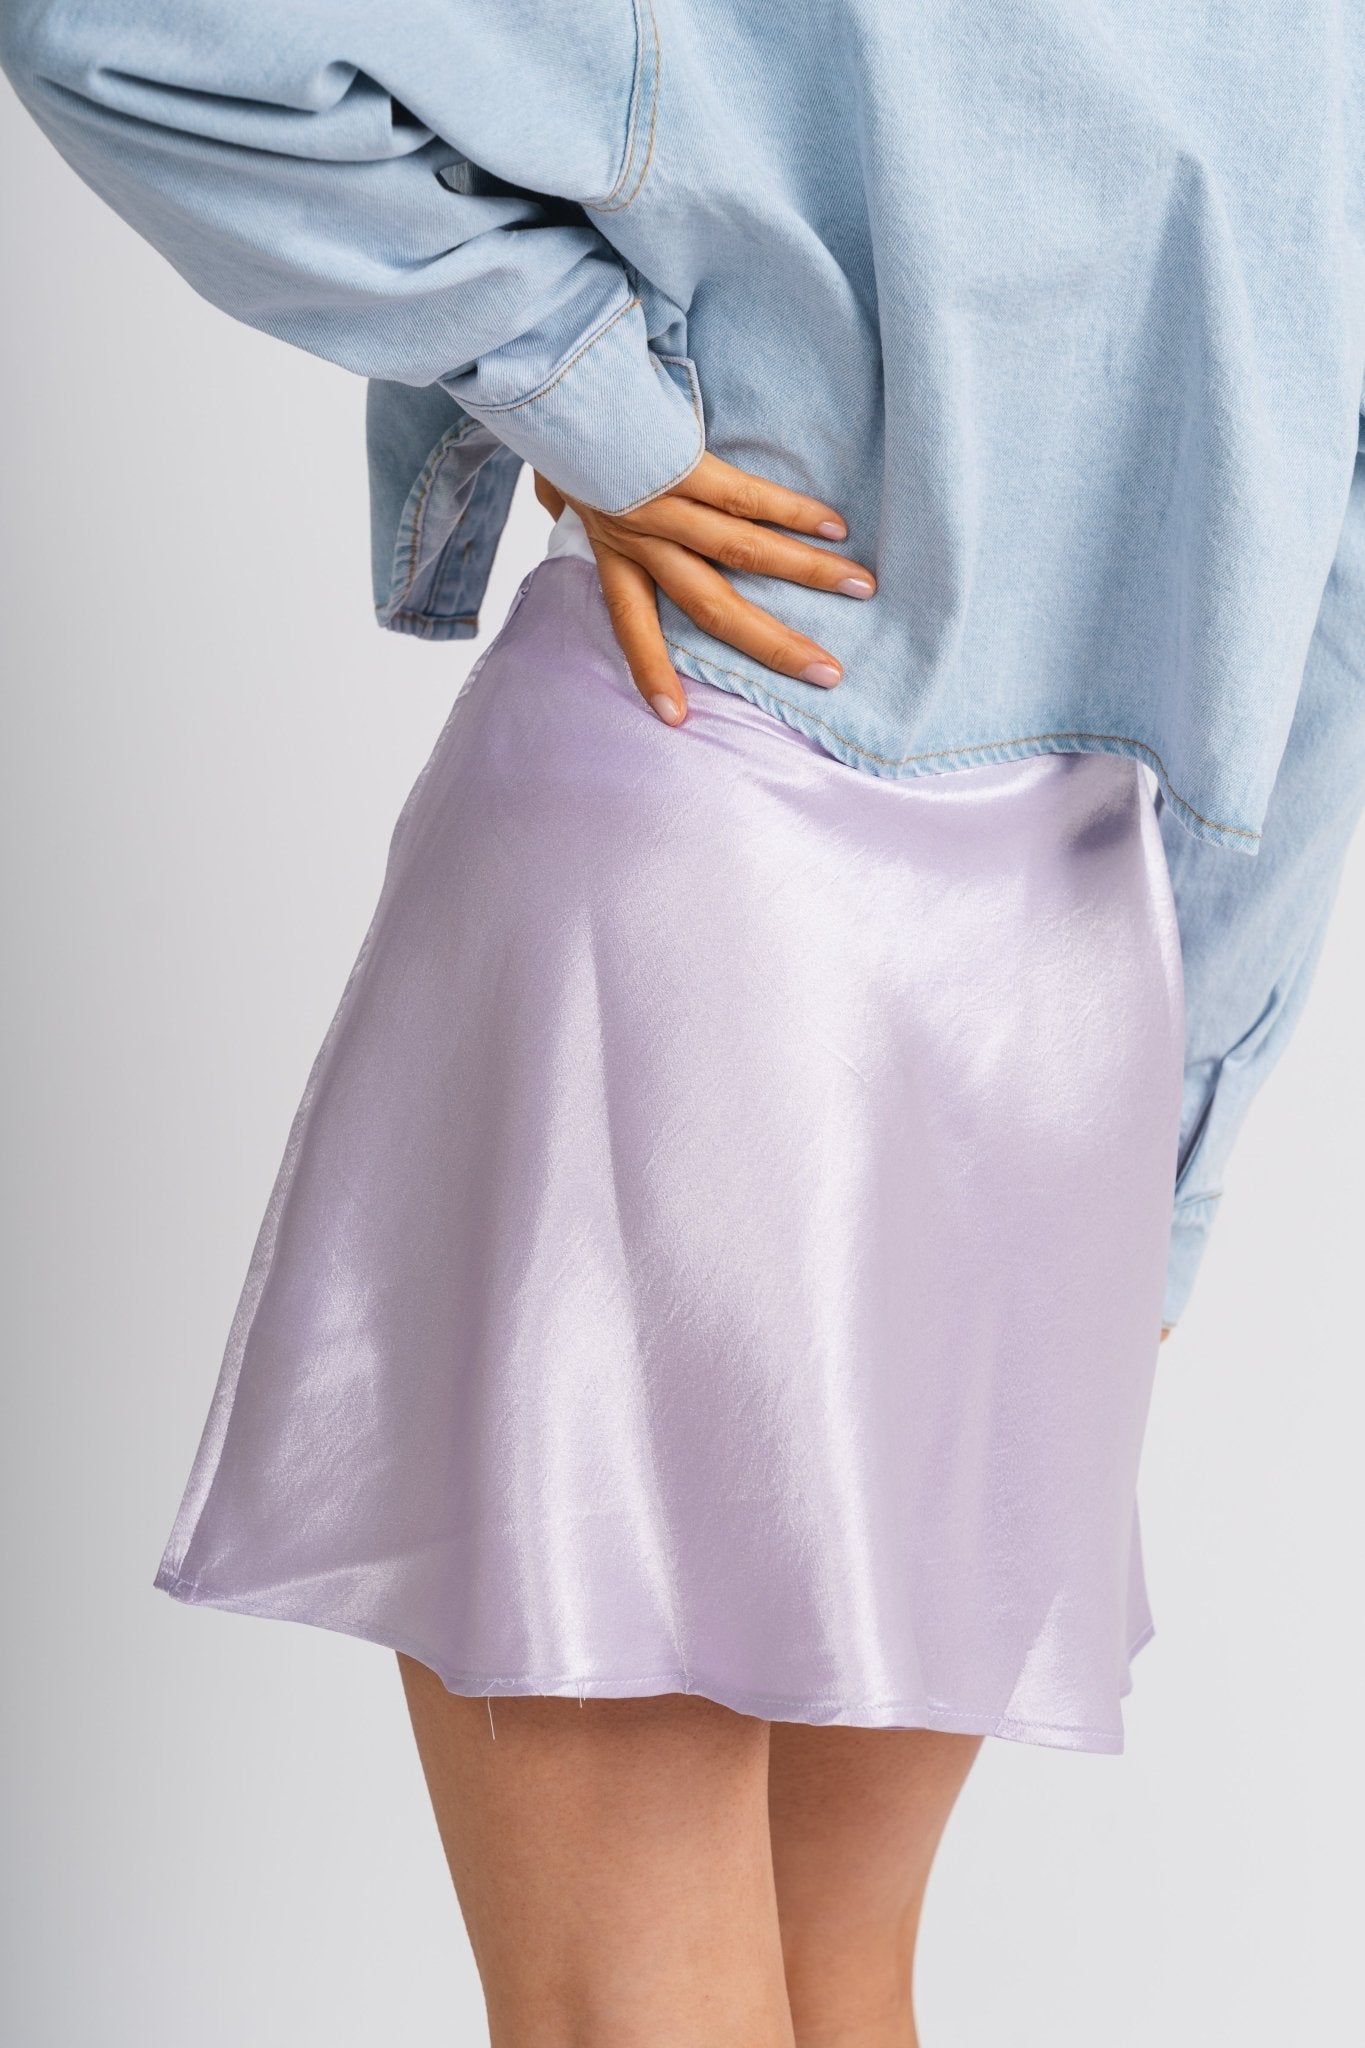 Satin flare mini skirt lavender - Affordable Skirt - Unique Easter Style at Lush Fashion Lounge Boutique in Oklahoma